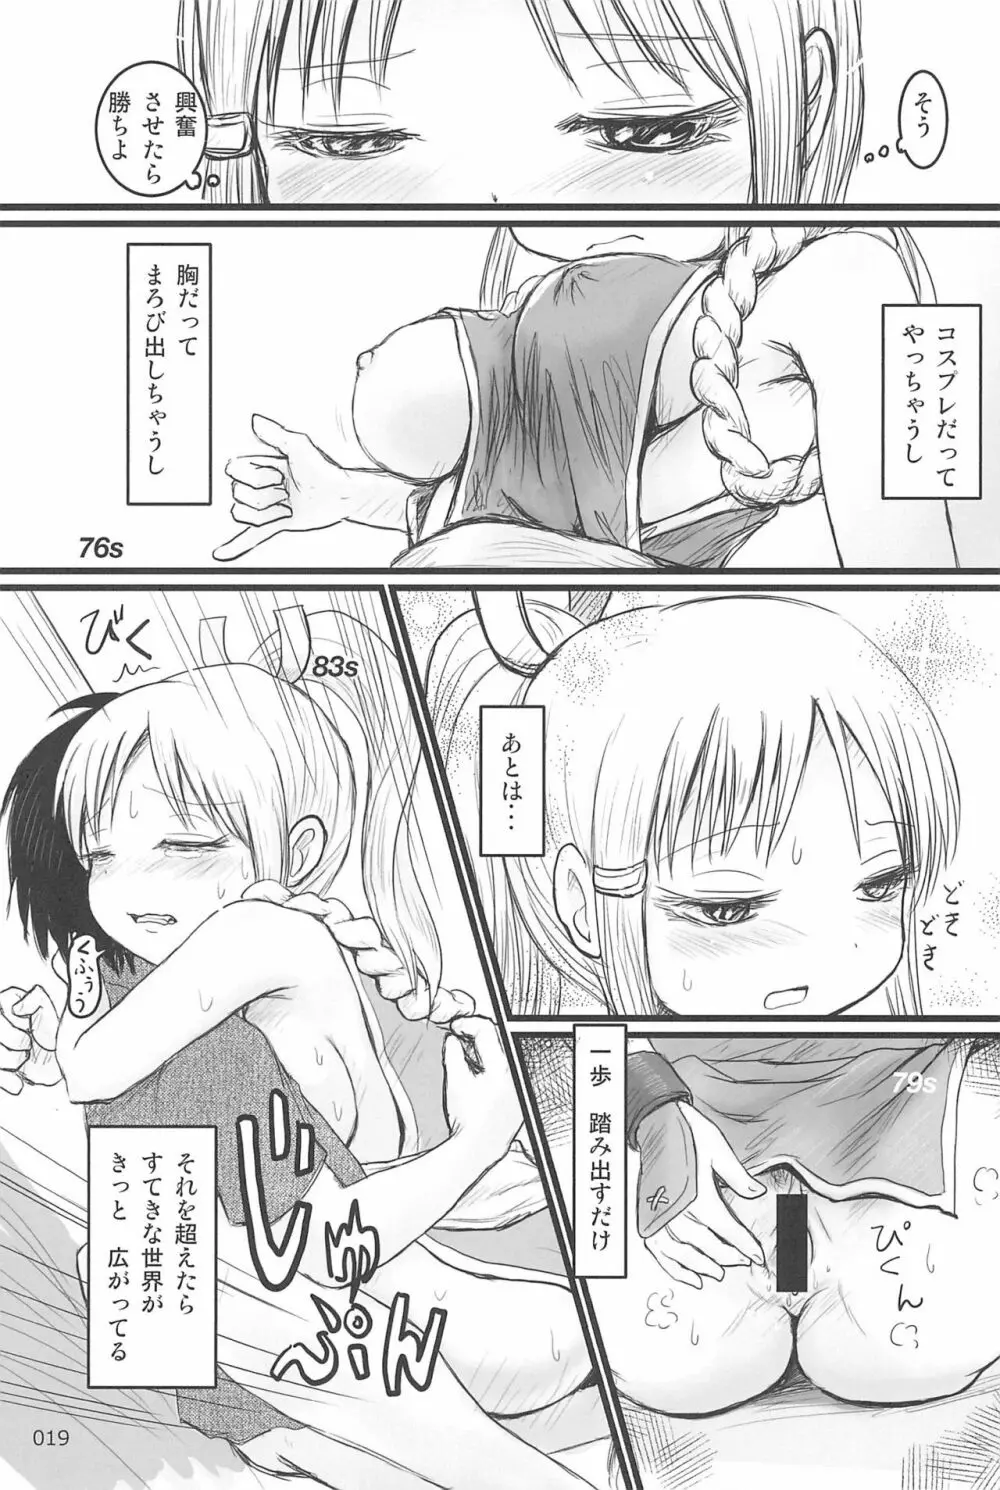 ND-special Volume 6 19ページ